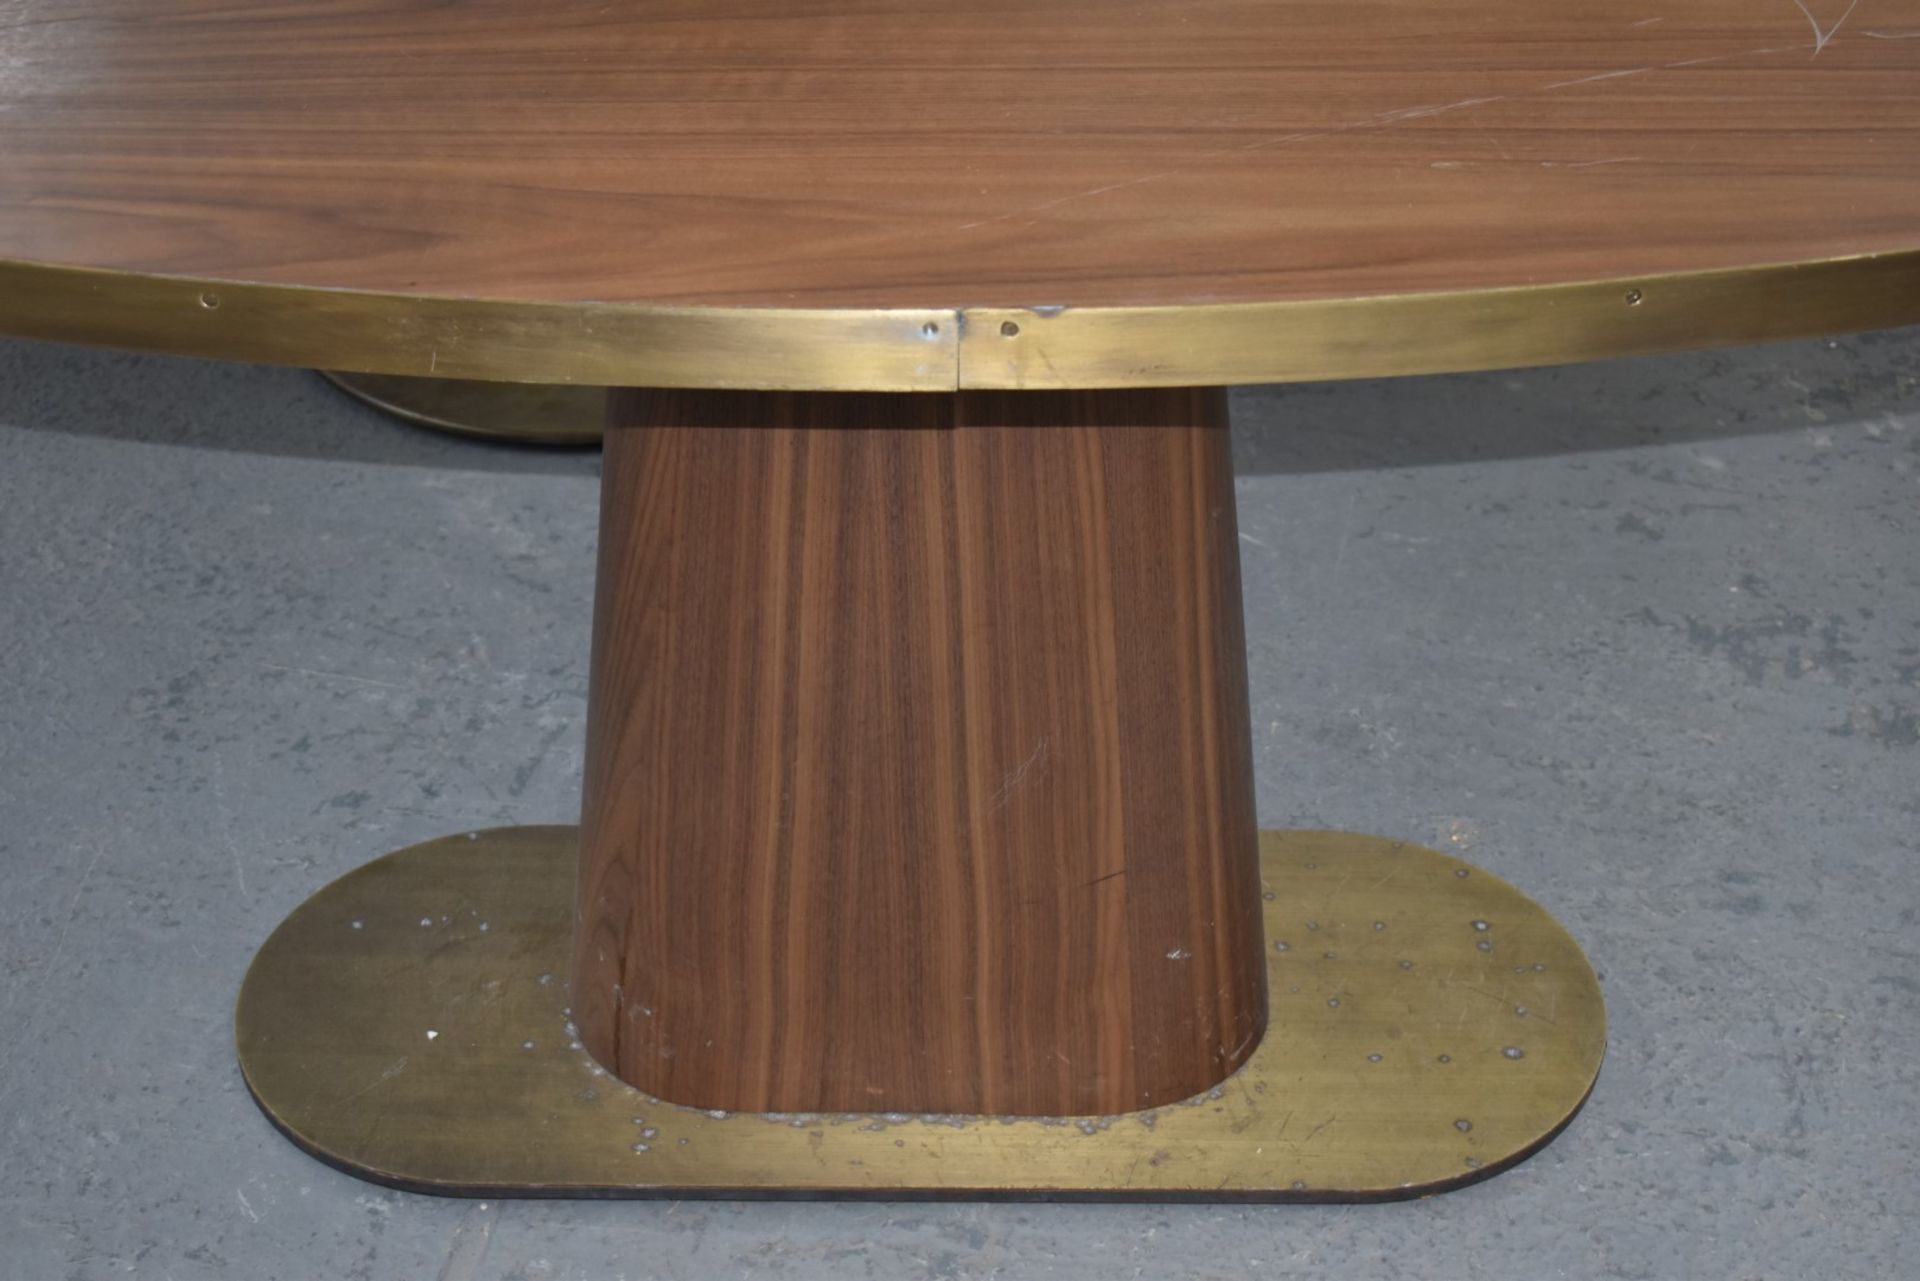 1 x Oval Banqueting Dining Table By AKP Design Athens - Walnut Top With Antique Brass Edging - Image 2 of 7